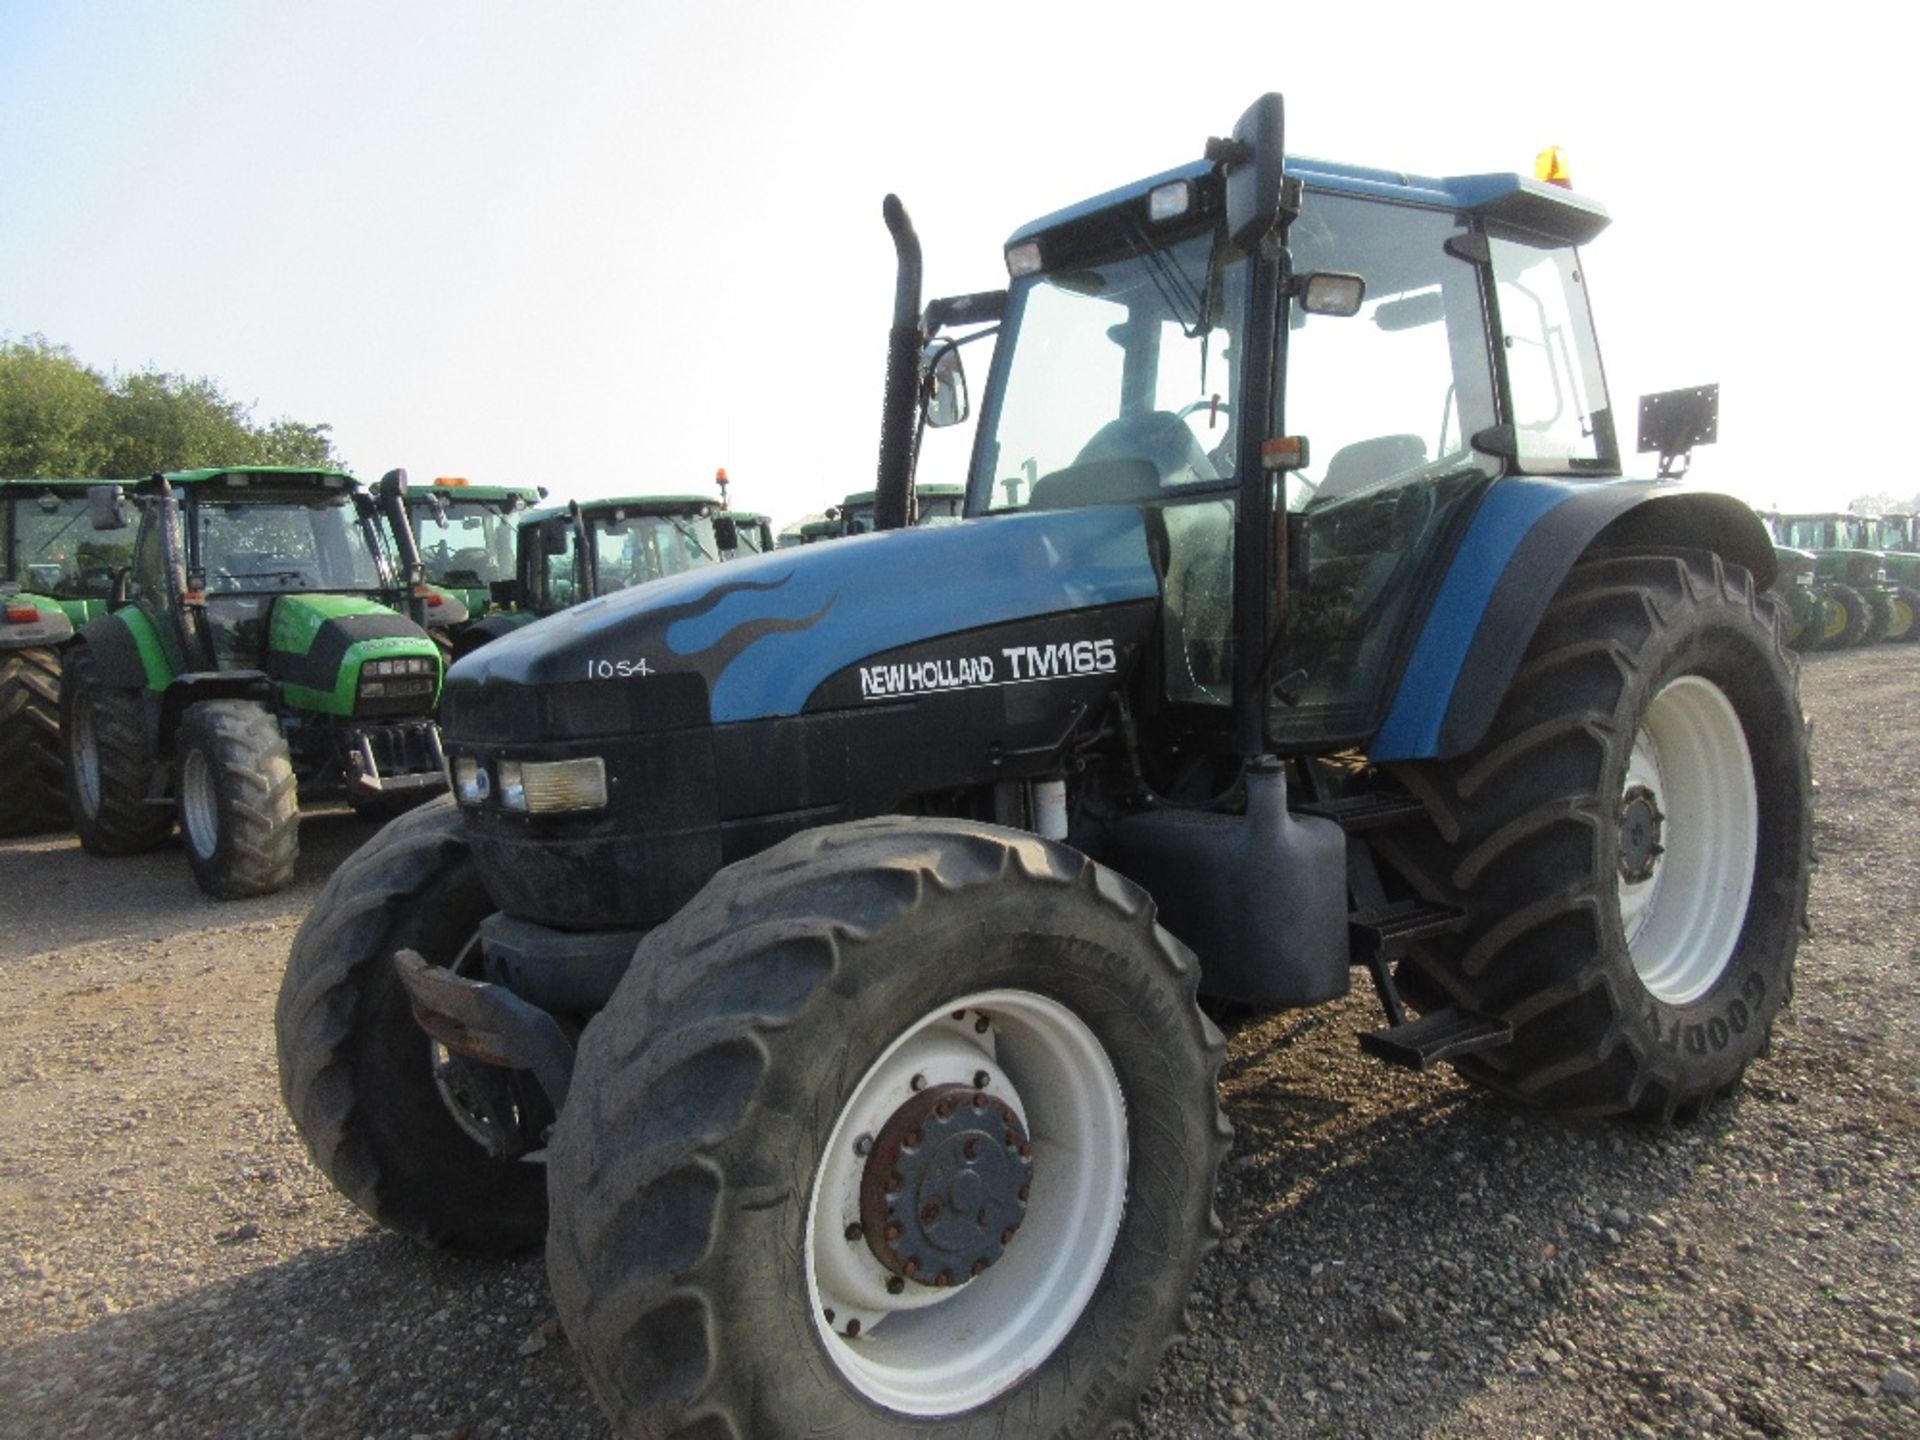 2000 New Holland TM165 Power Command Super Steer Tractor with Goodyear 650/65R38 Tyres. V5 will be